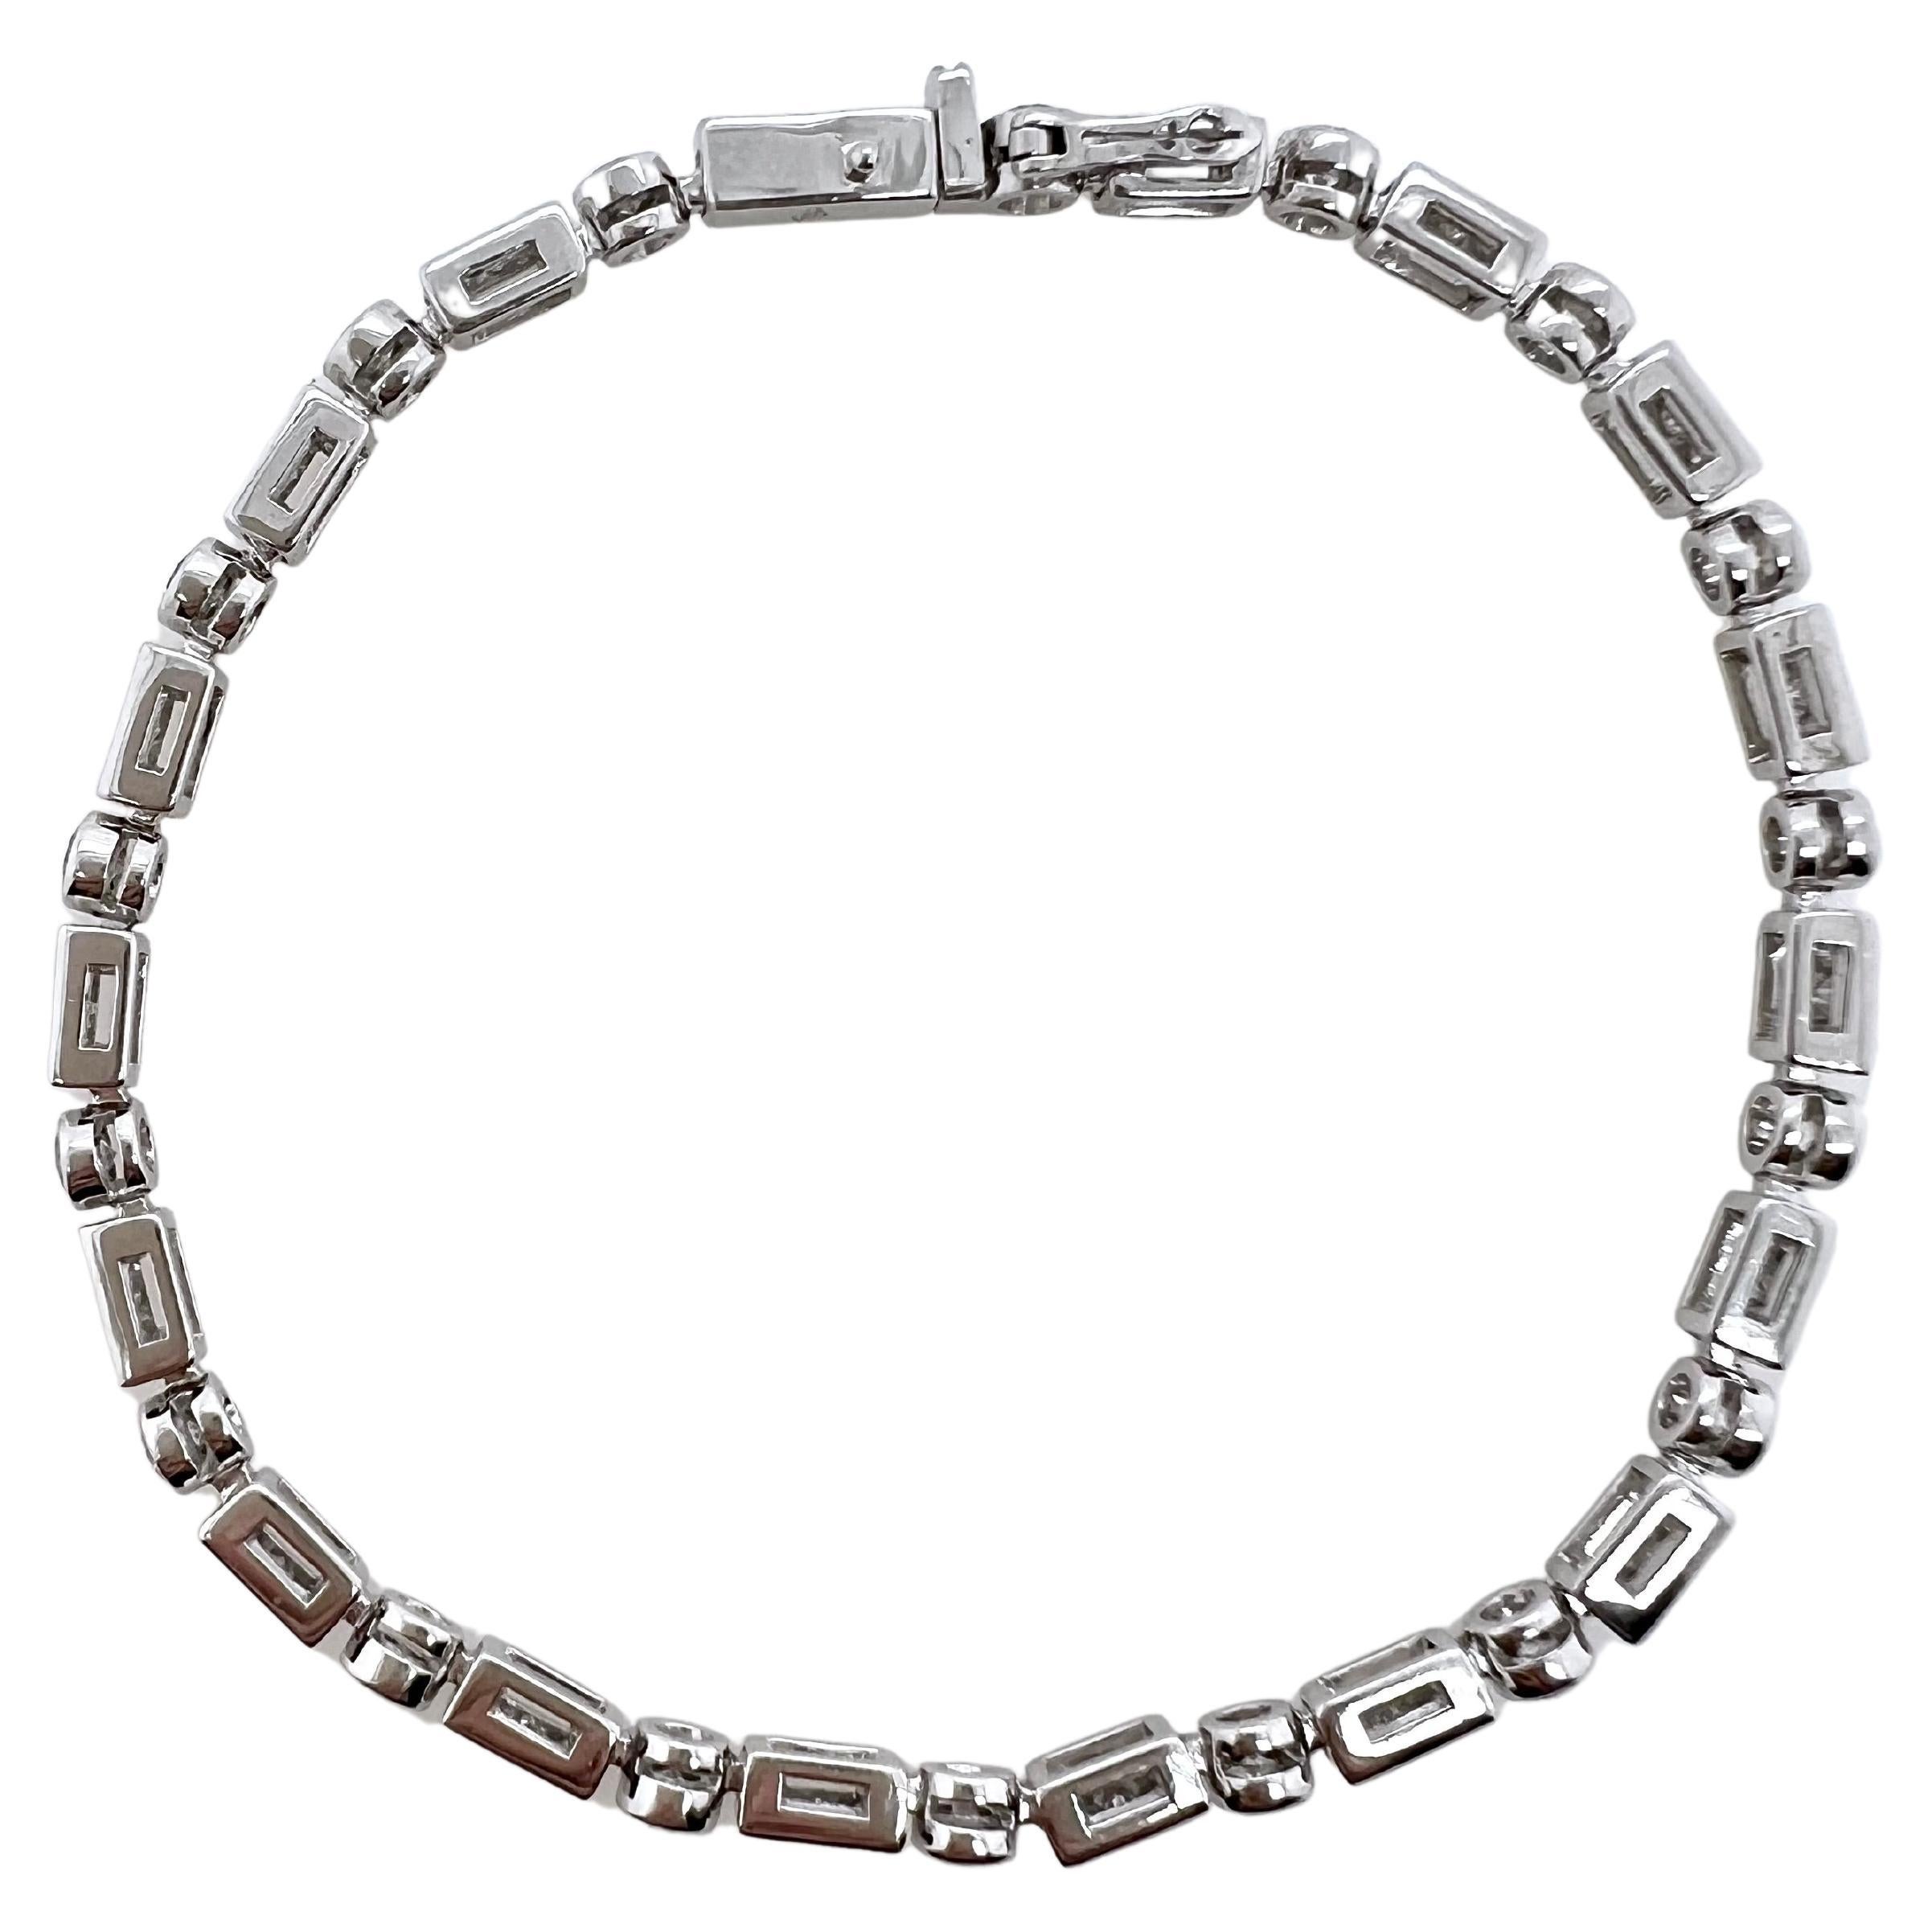 Contemporary 18k White Gold Diamond with Round Brilliant and Baguettes Tennis Bracelet